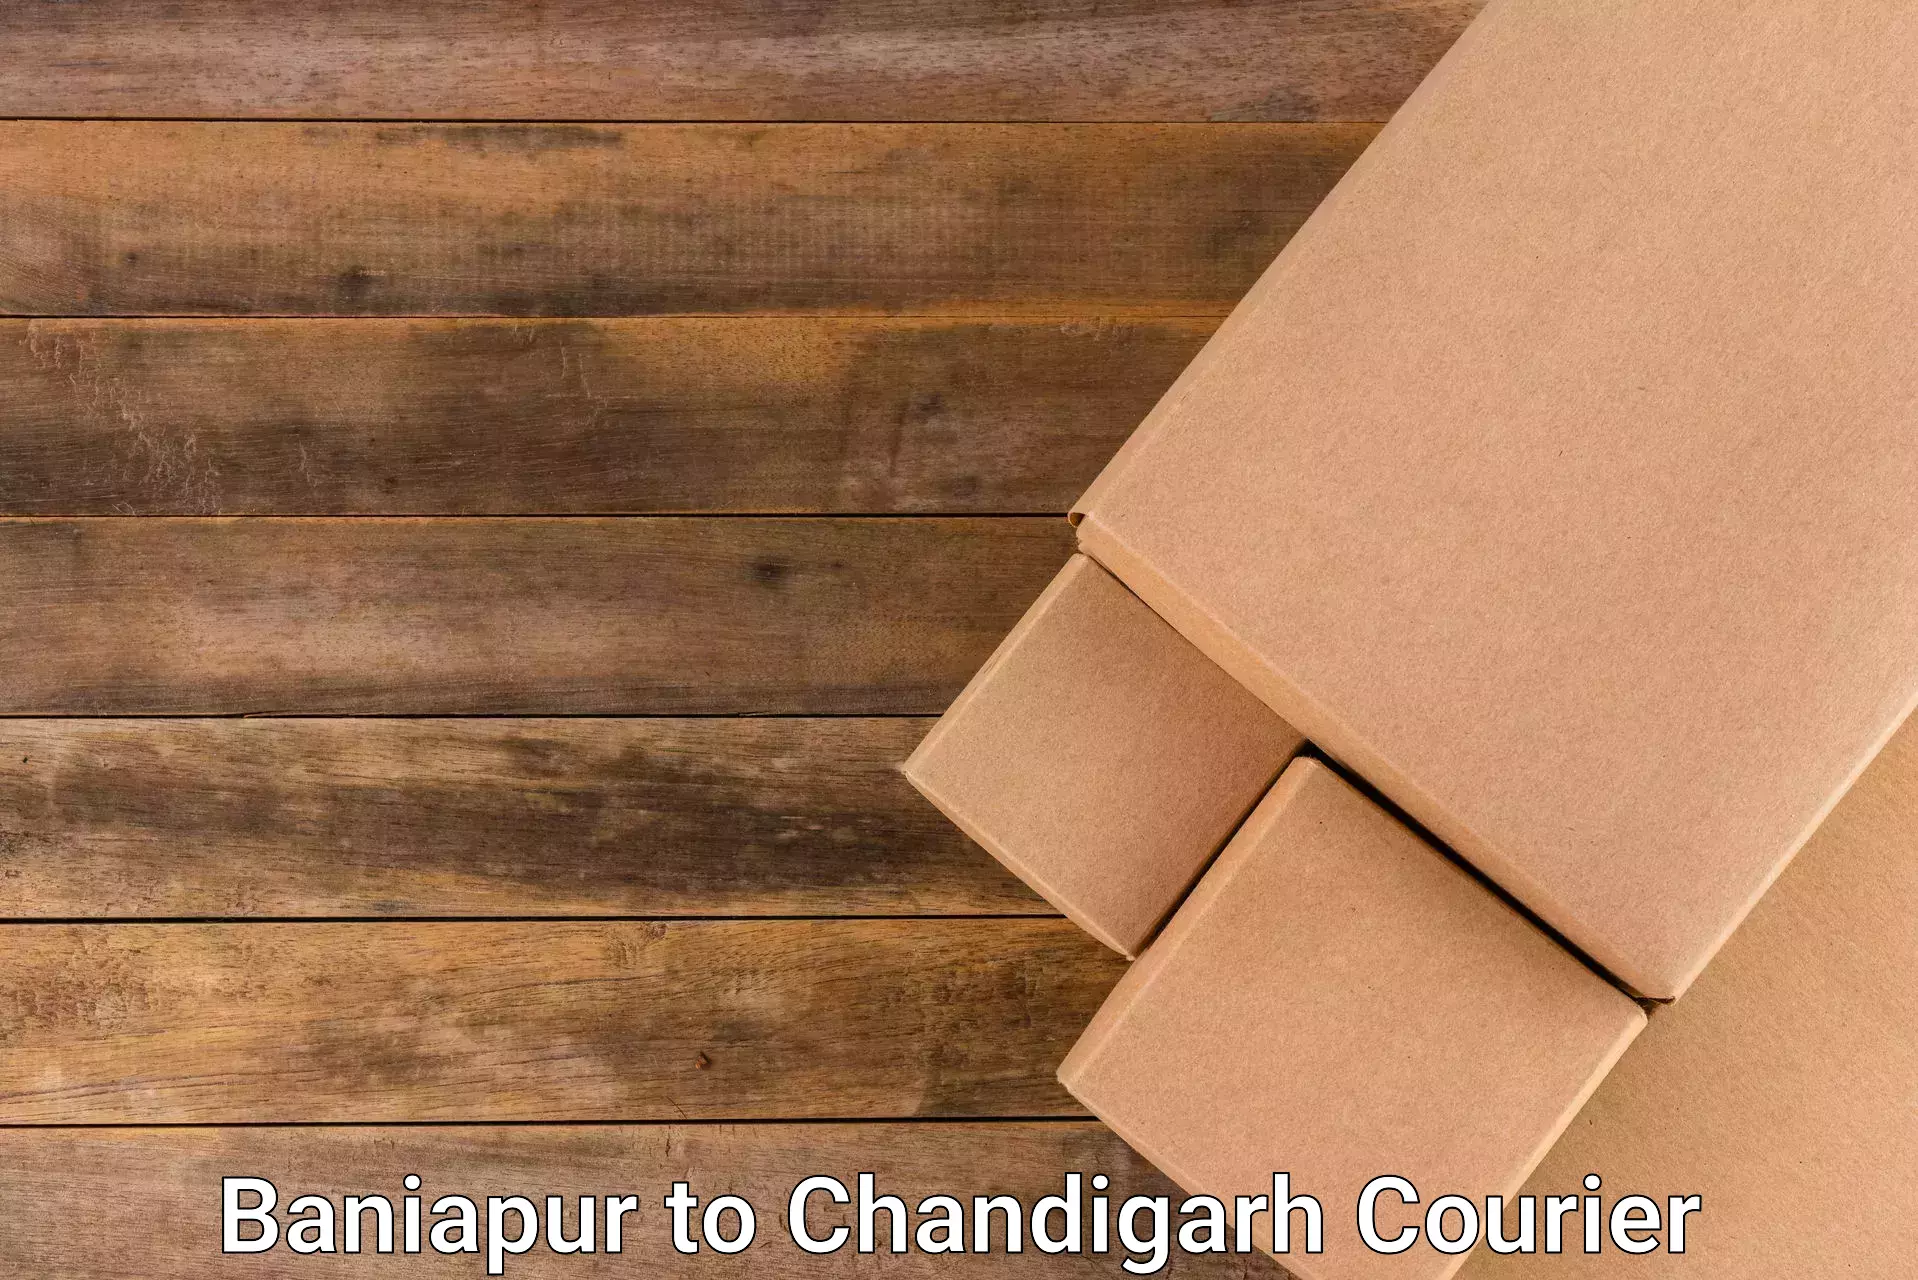 Local delivery service Baniapur to Chandigarh